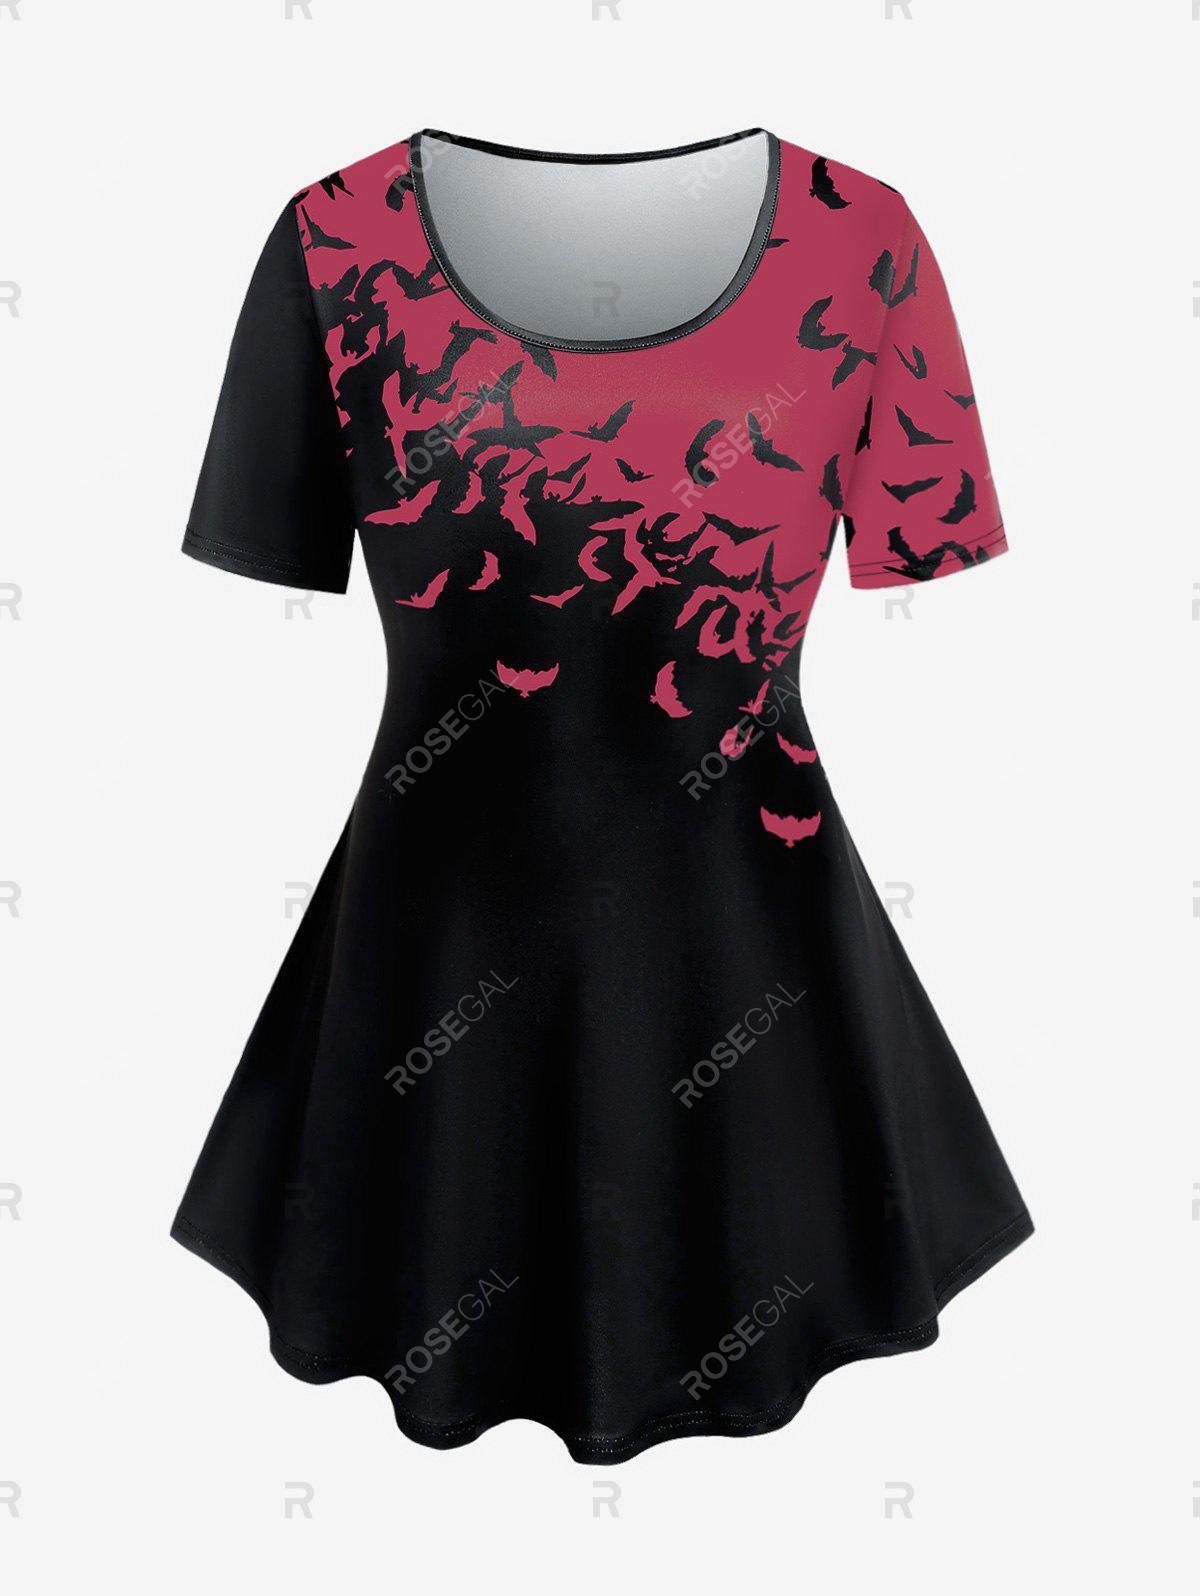 Bat Print Two Tone Tee and Leggings Plus Size Matching Set Outfit